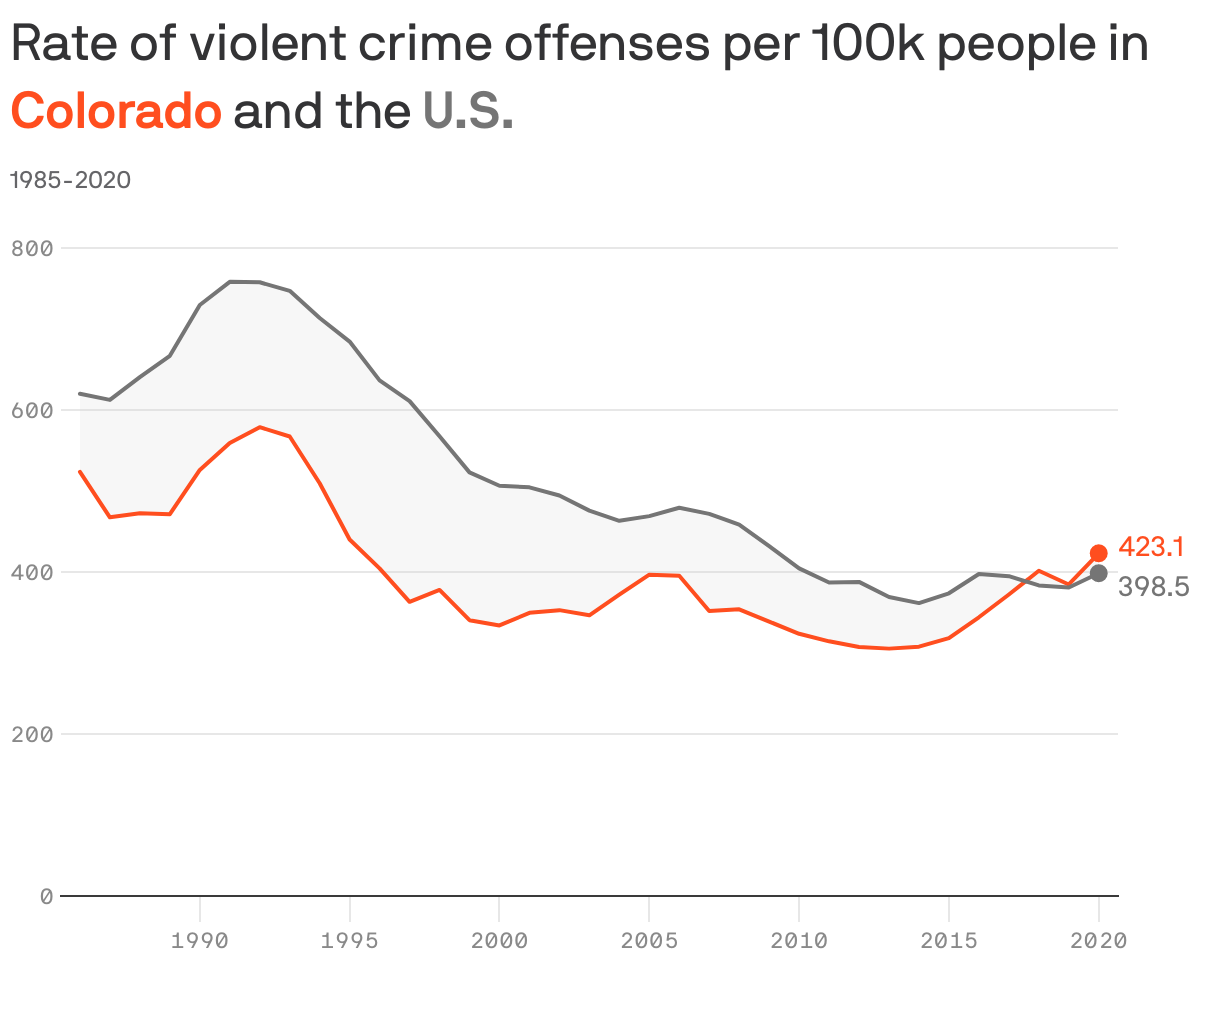 Rate of violent crime offenses per 100k people in <b style='color:#ff4e1f'>Colorado</b> and the <b style='color:#757575'>U.S.</b>